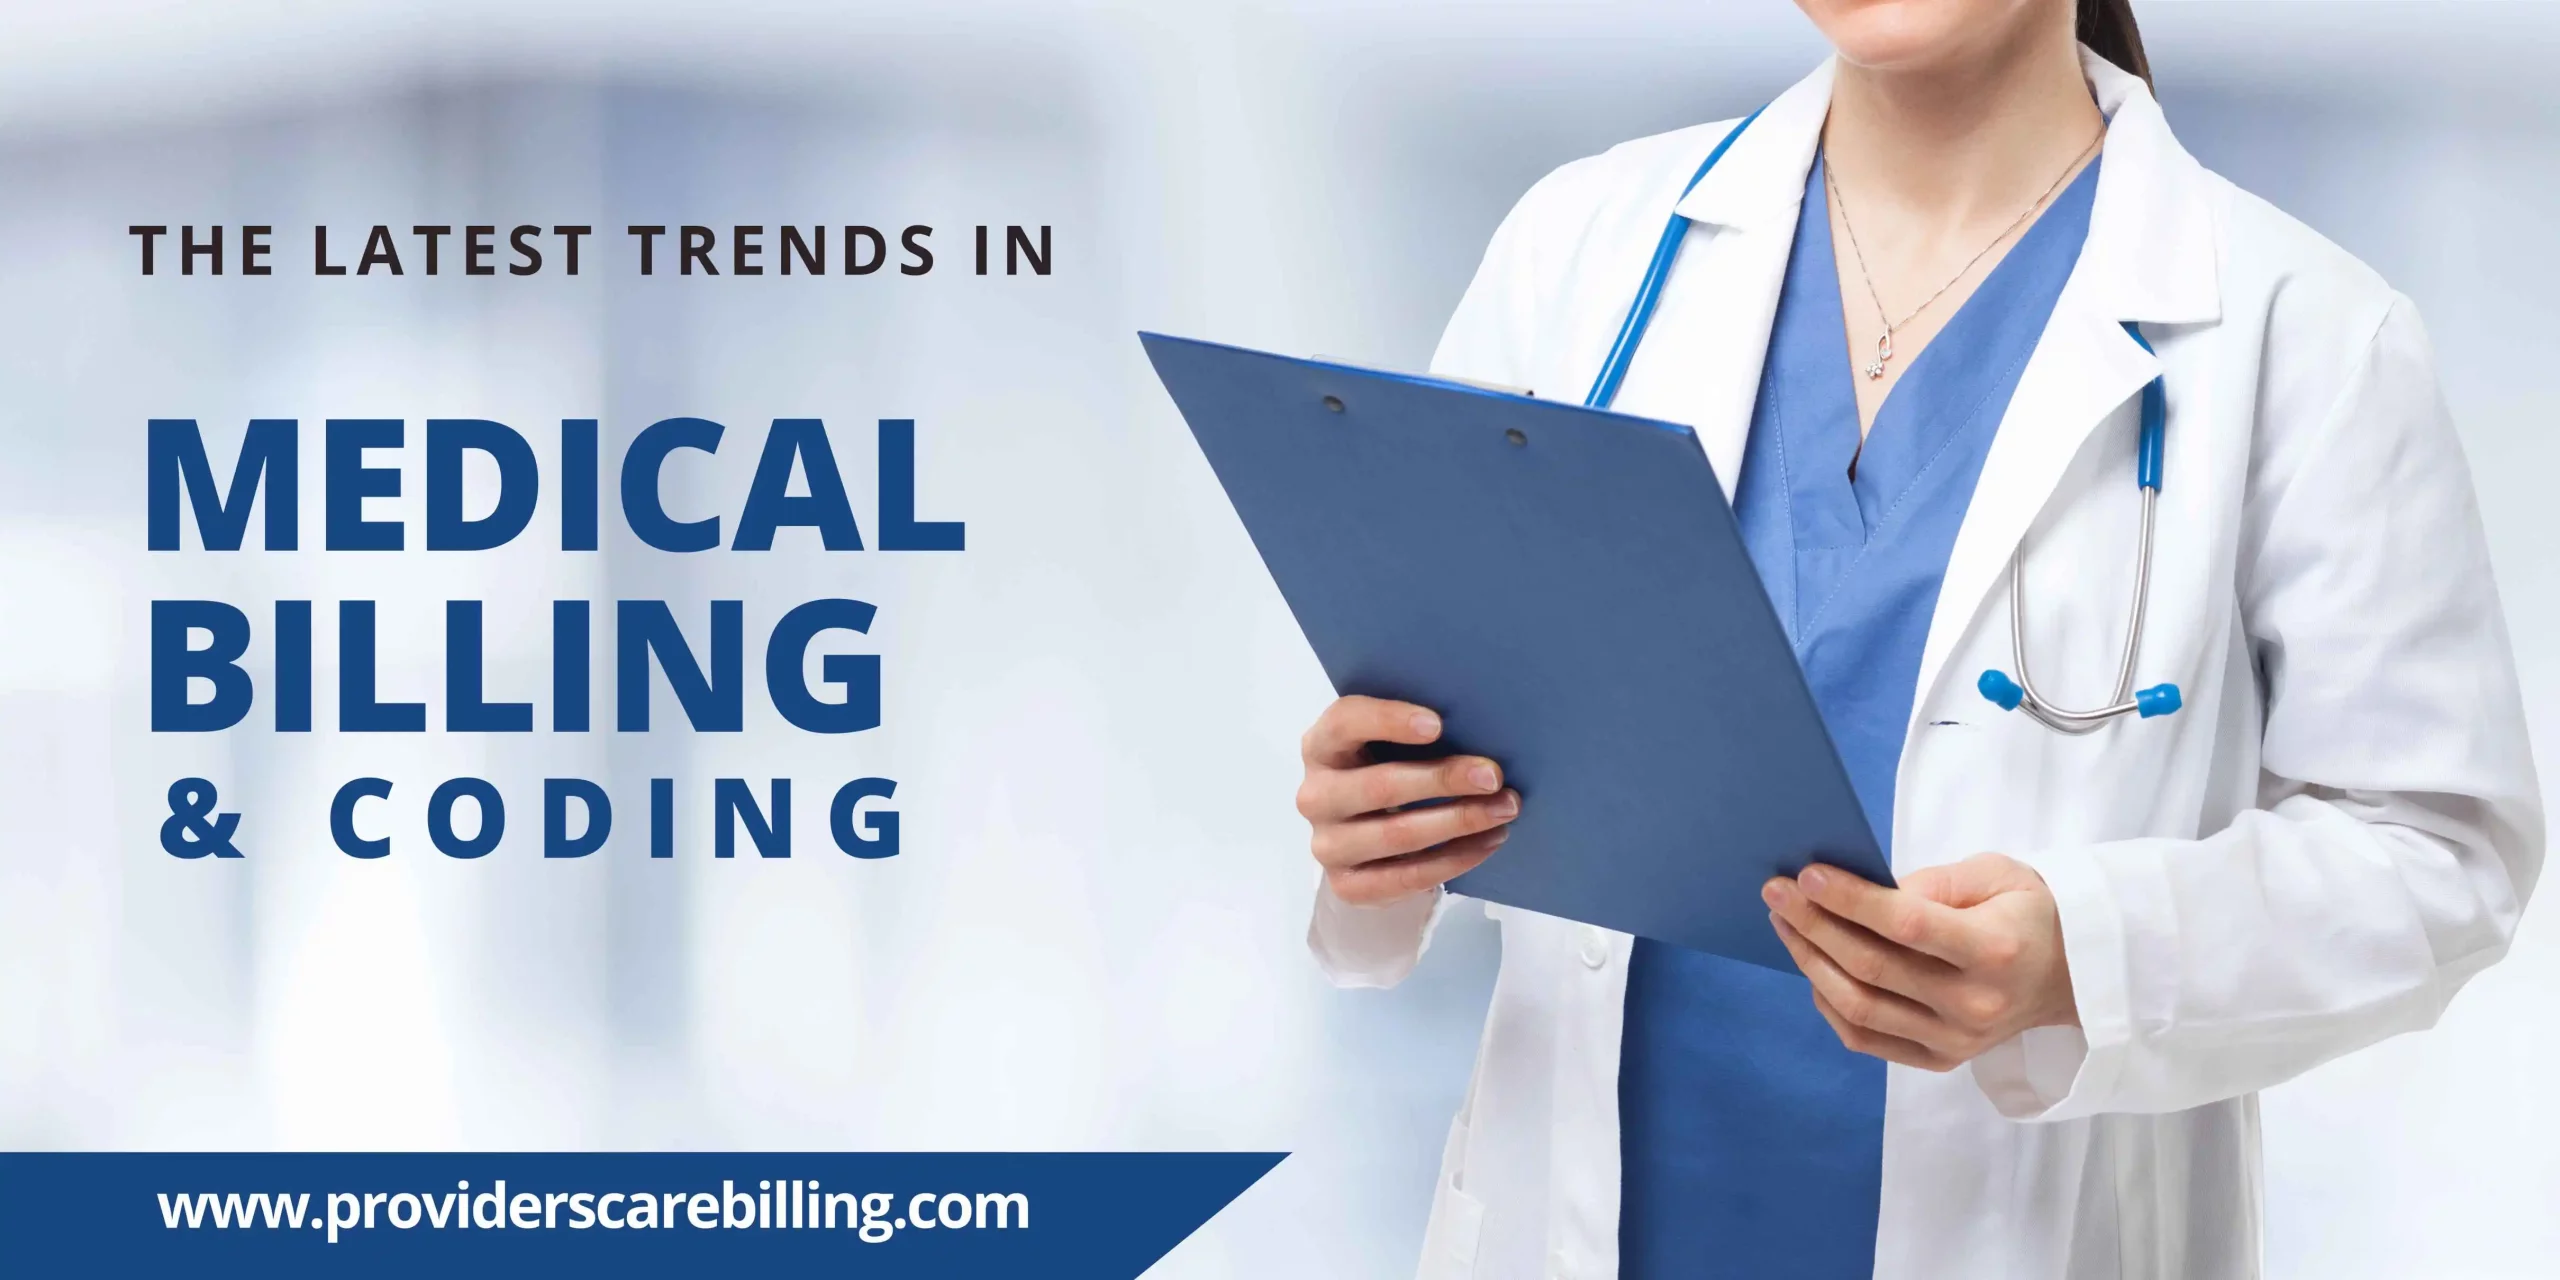 The latest trends in medical billing and coding